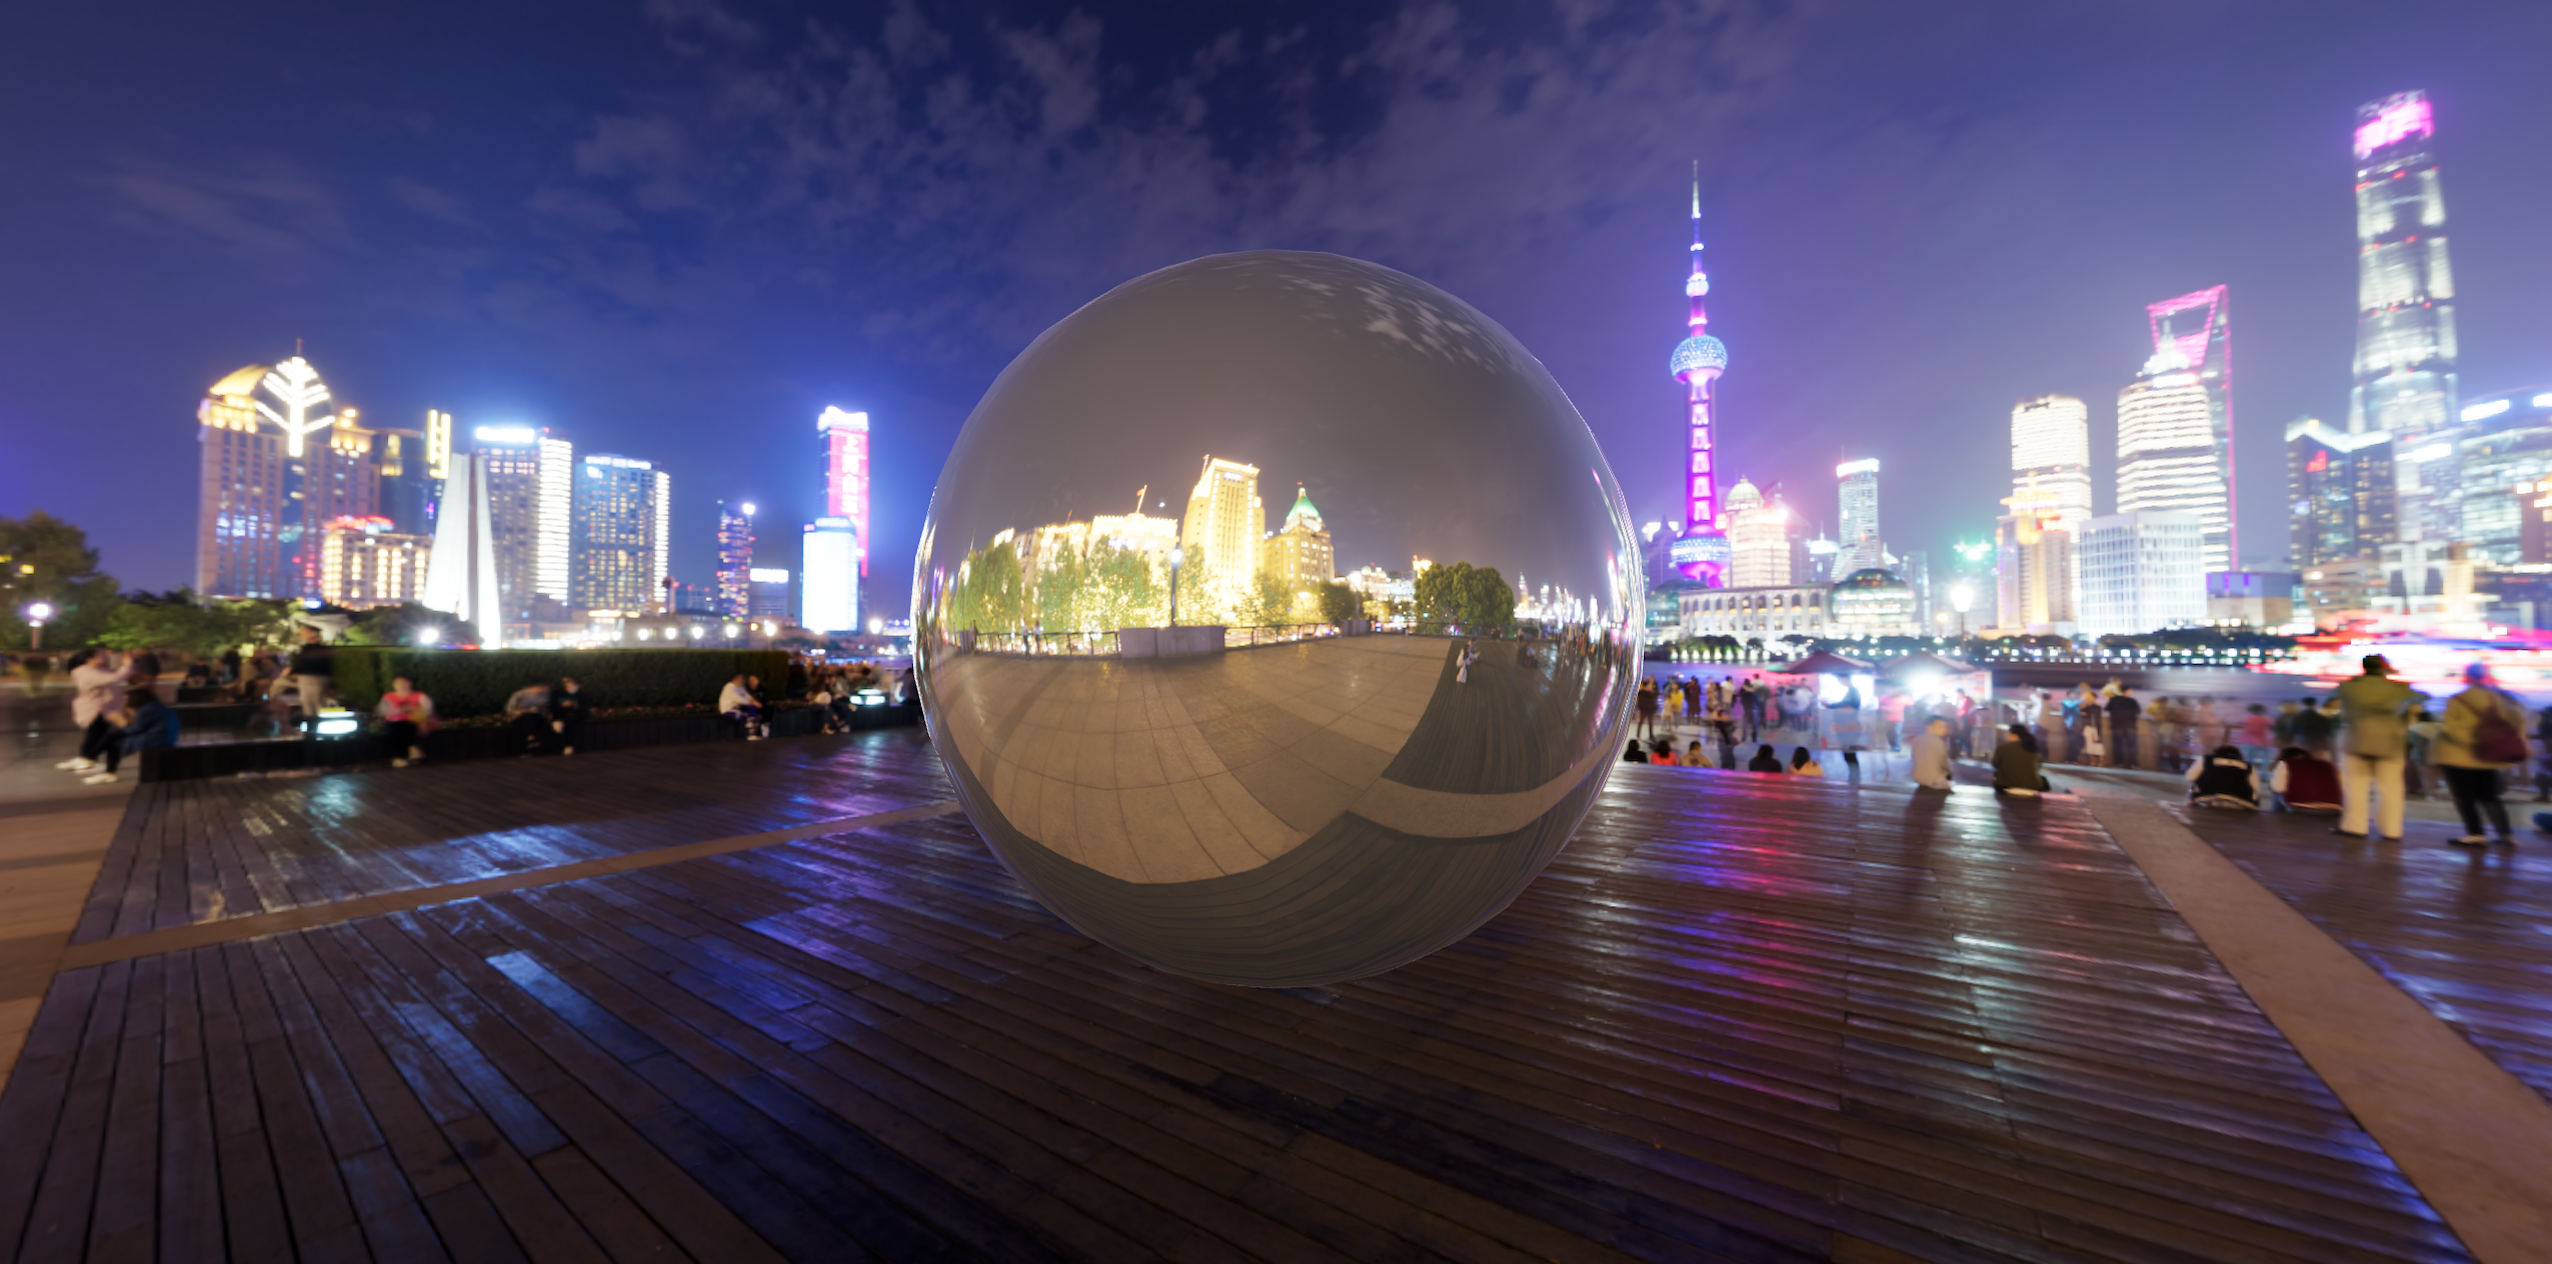 Background reflection on sphere